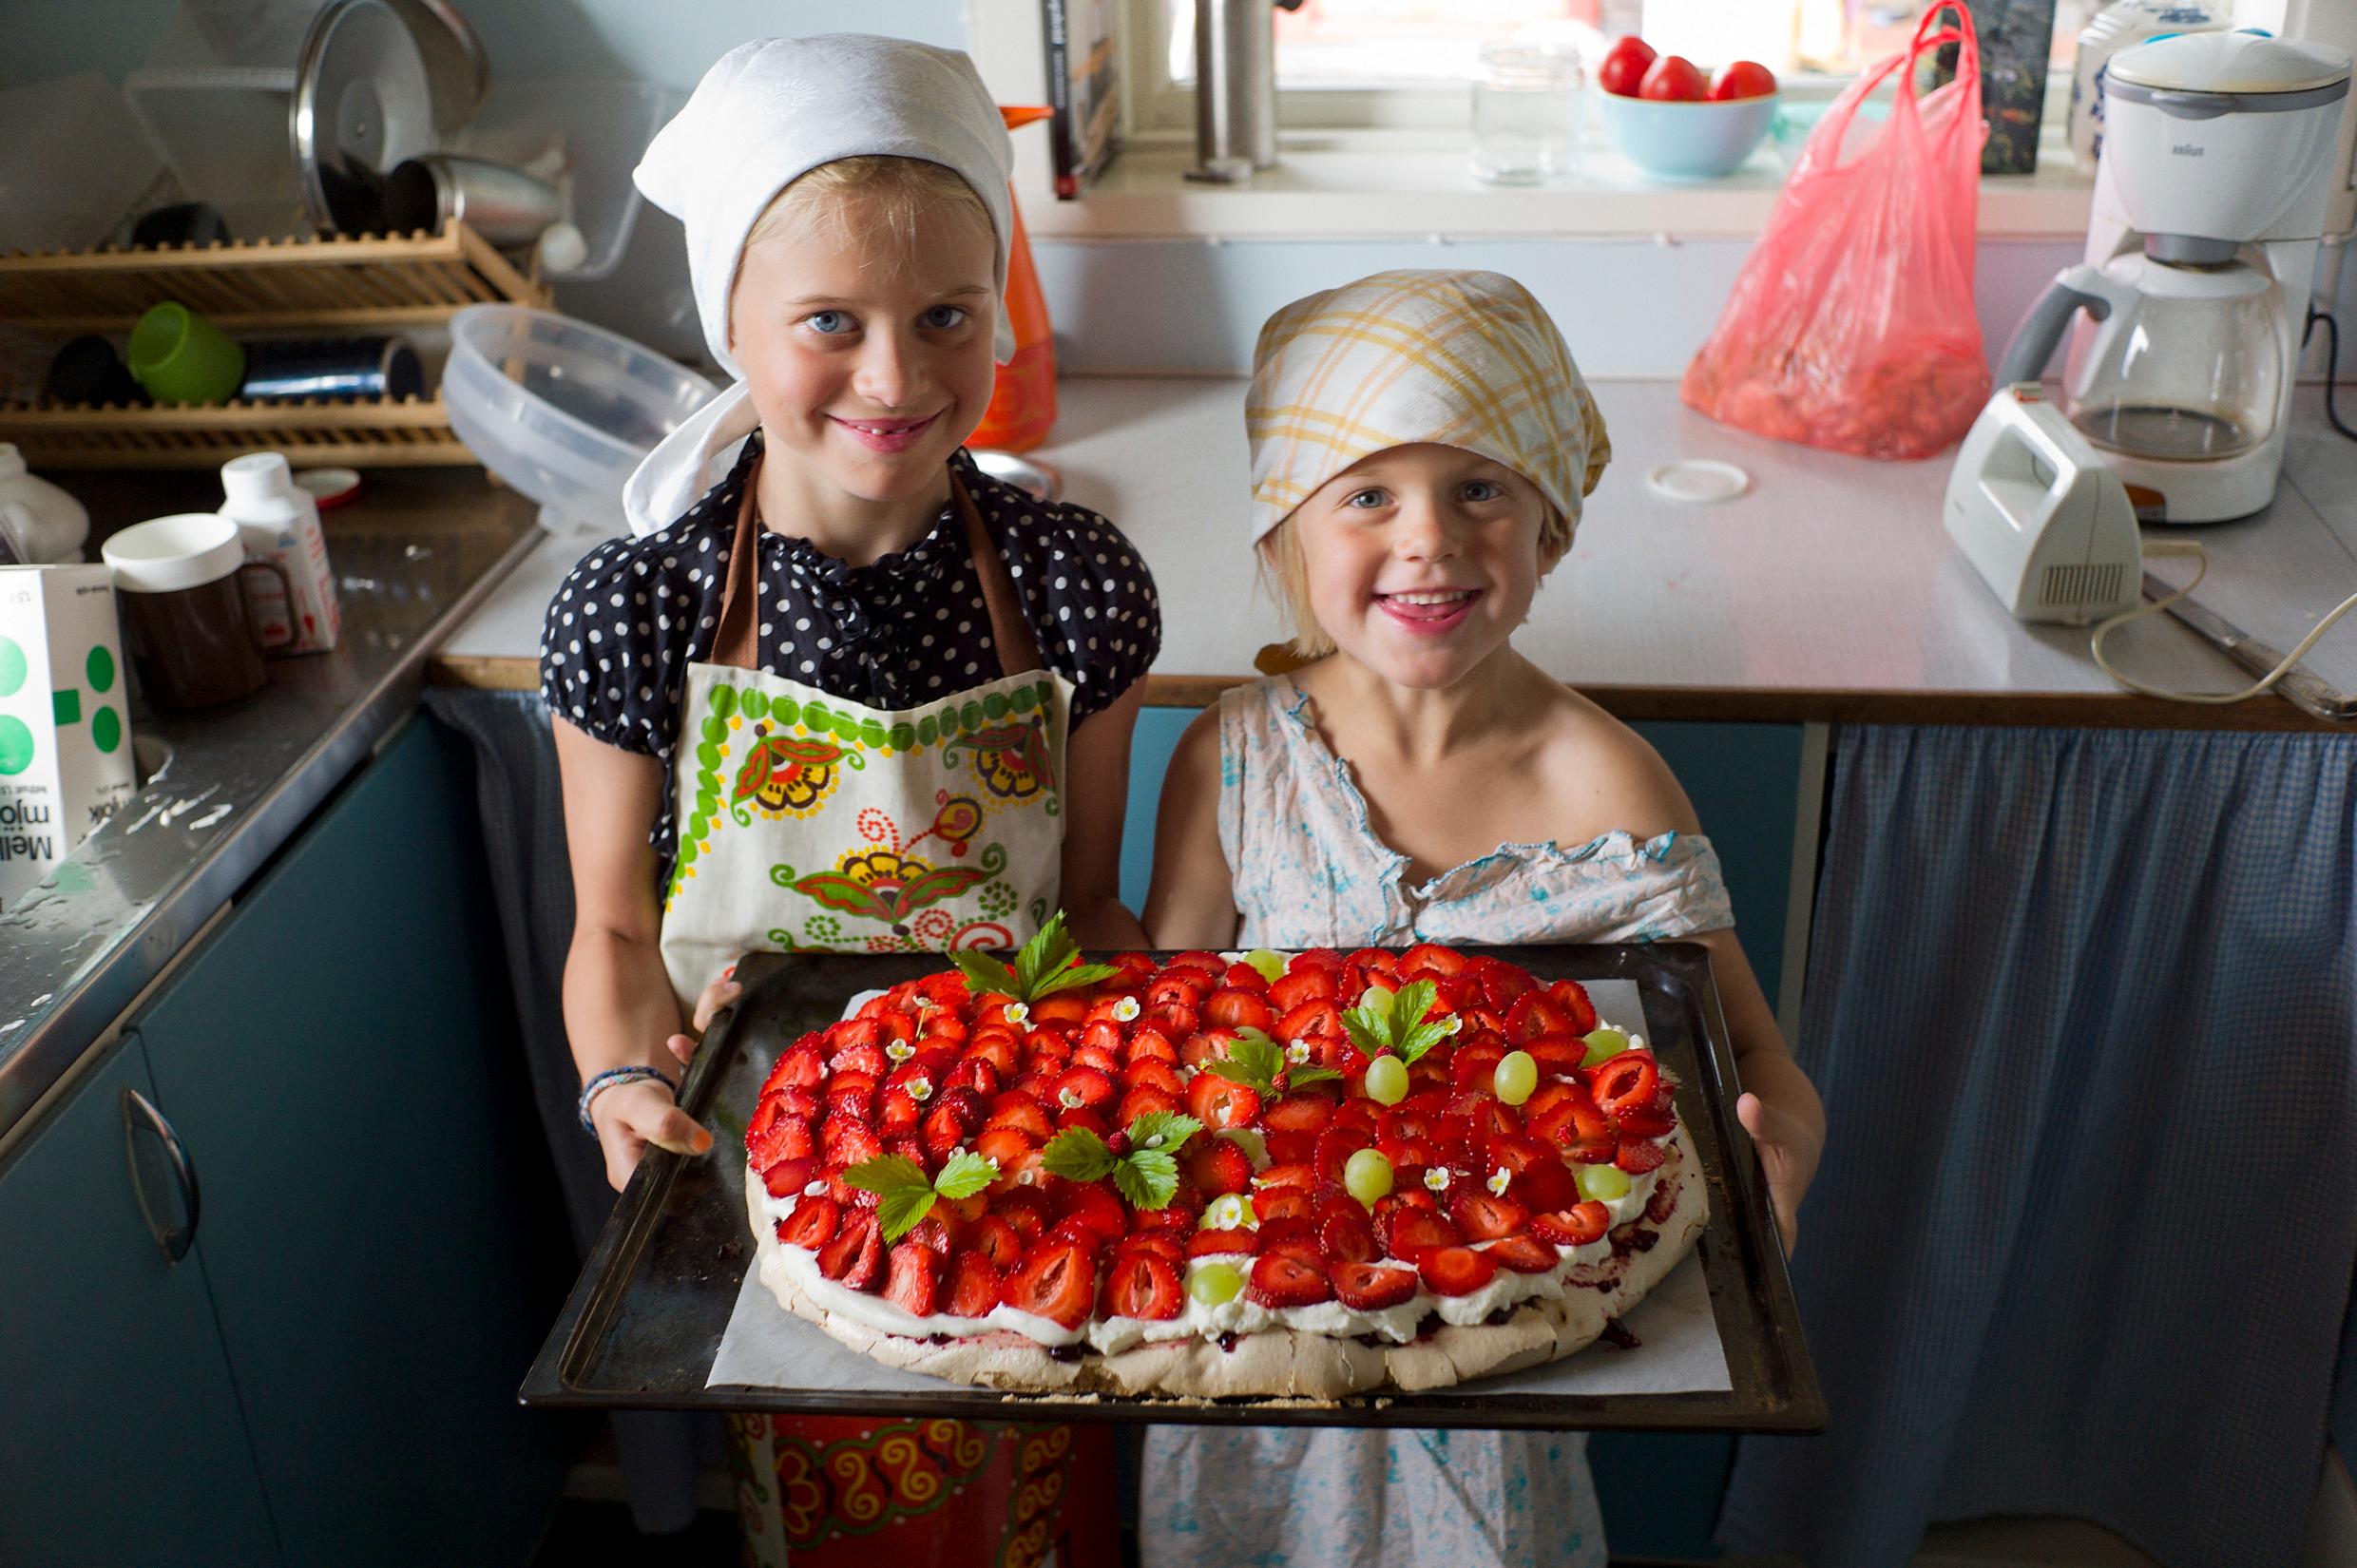 Two girls with headscarves and aprons holding a strawberry cake – one of many classic Swedish recipes.